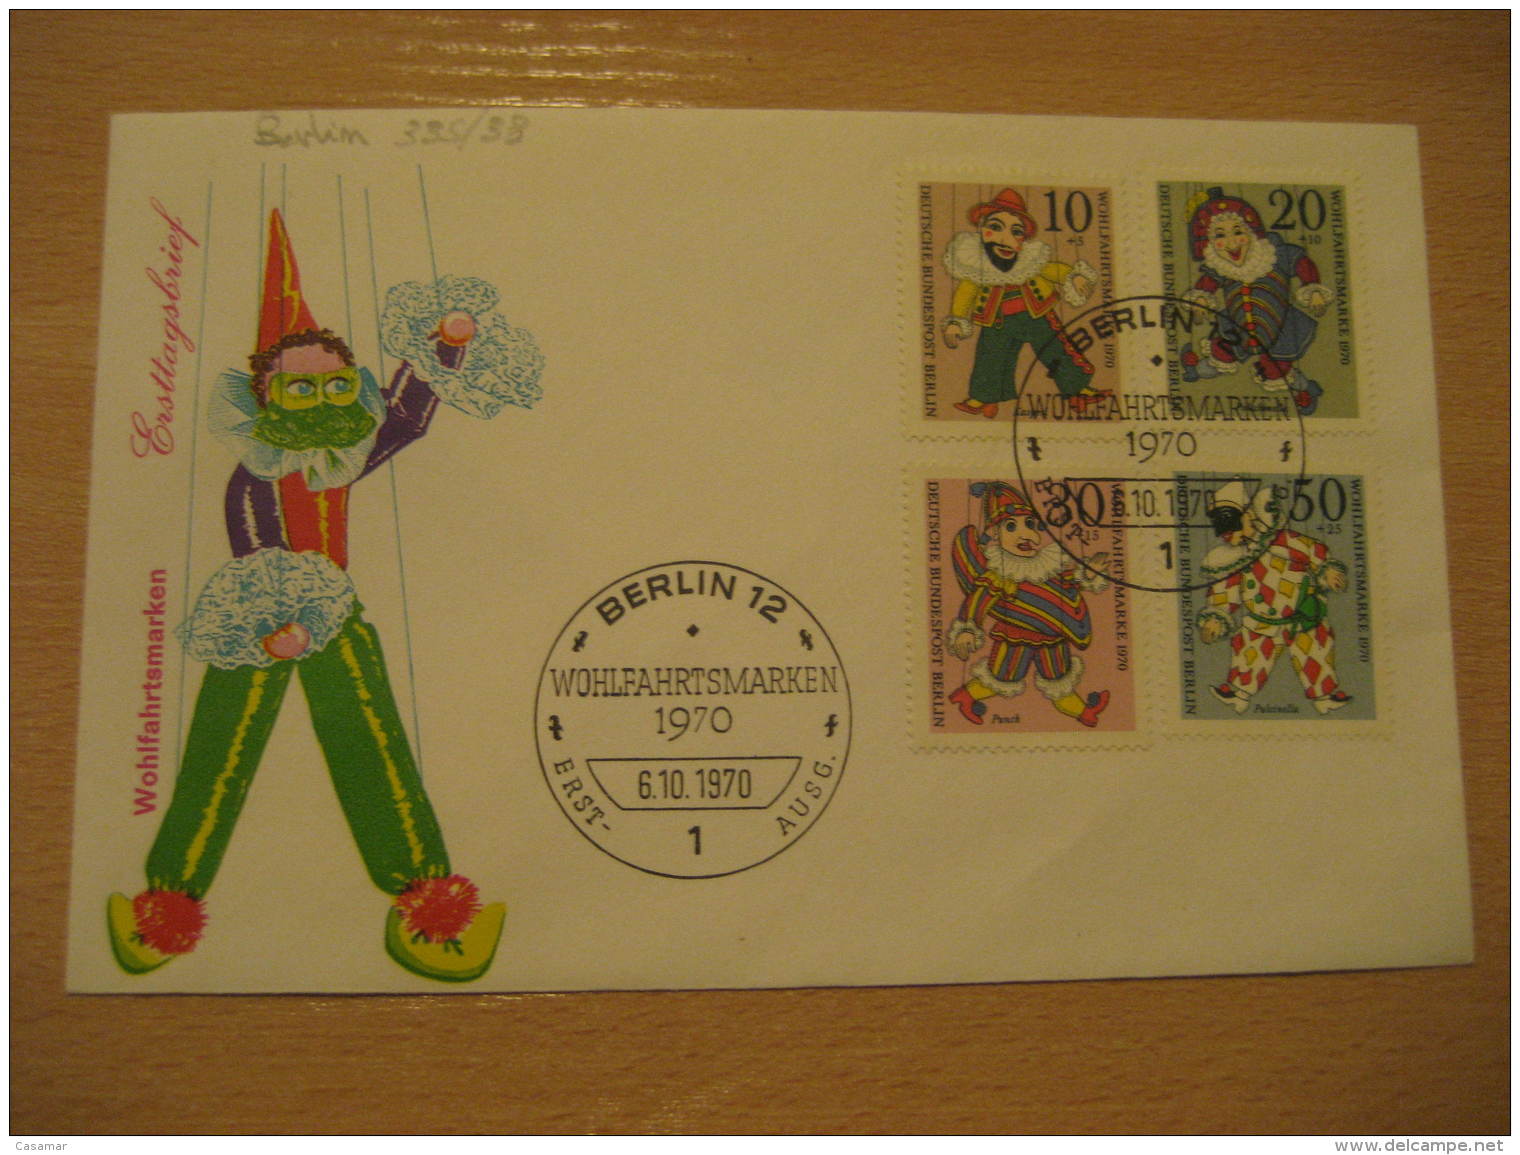 PUPPETS Yvert 335/8 Puppet Marionnette Marioneta Theater Theatre BERLIN 1970 FDC Cancel Cover BERLIN GERMANY - Puppets